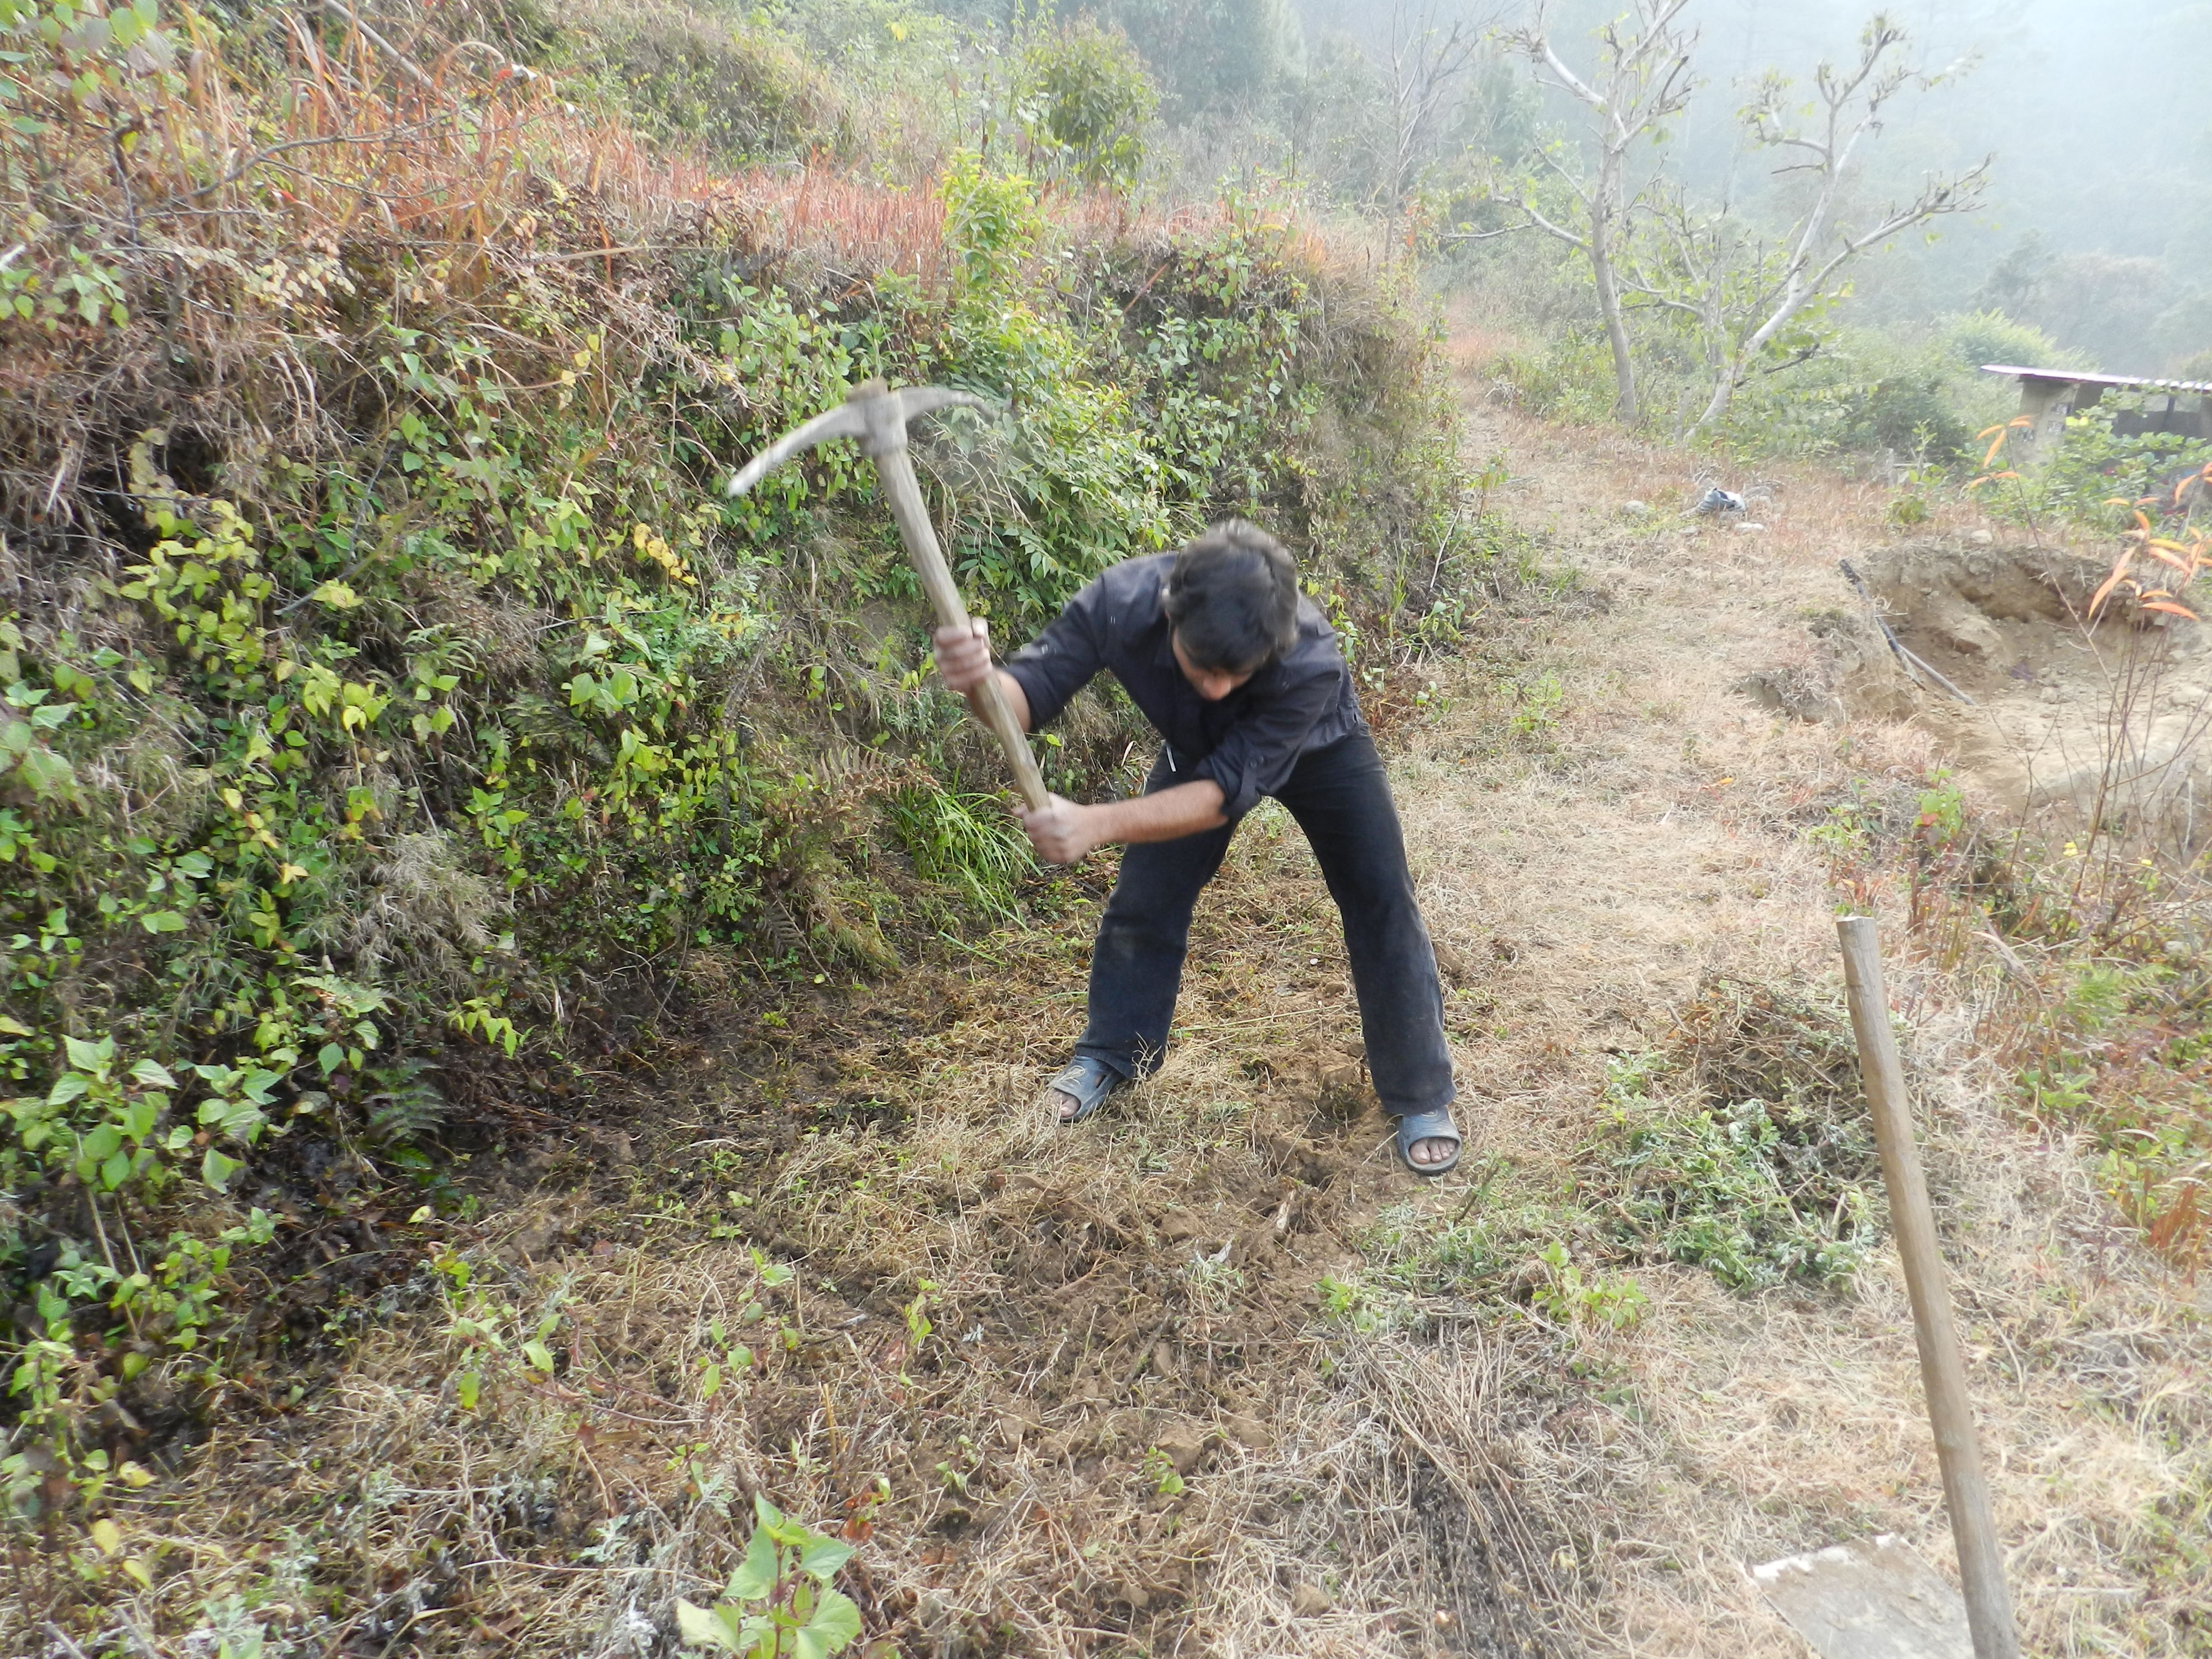 Sharma breaking ground in preparation to plant a new forest. Photo: Afforestt